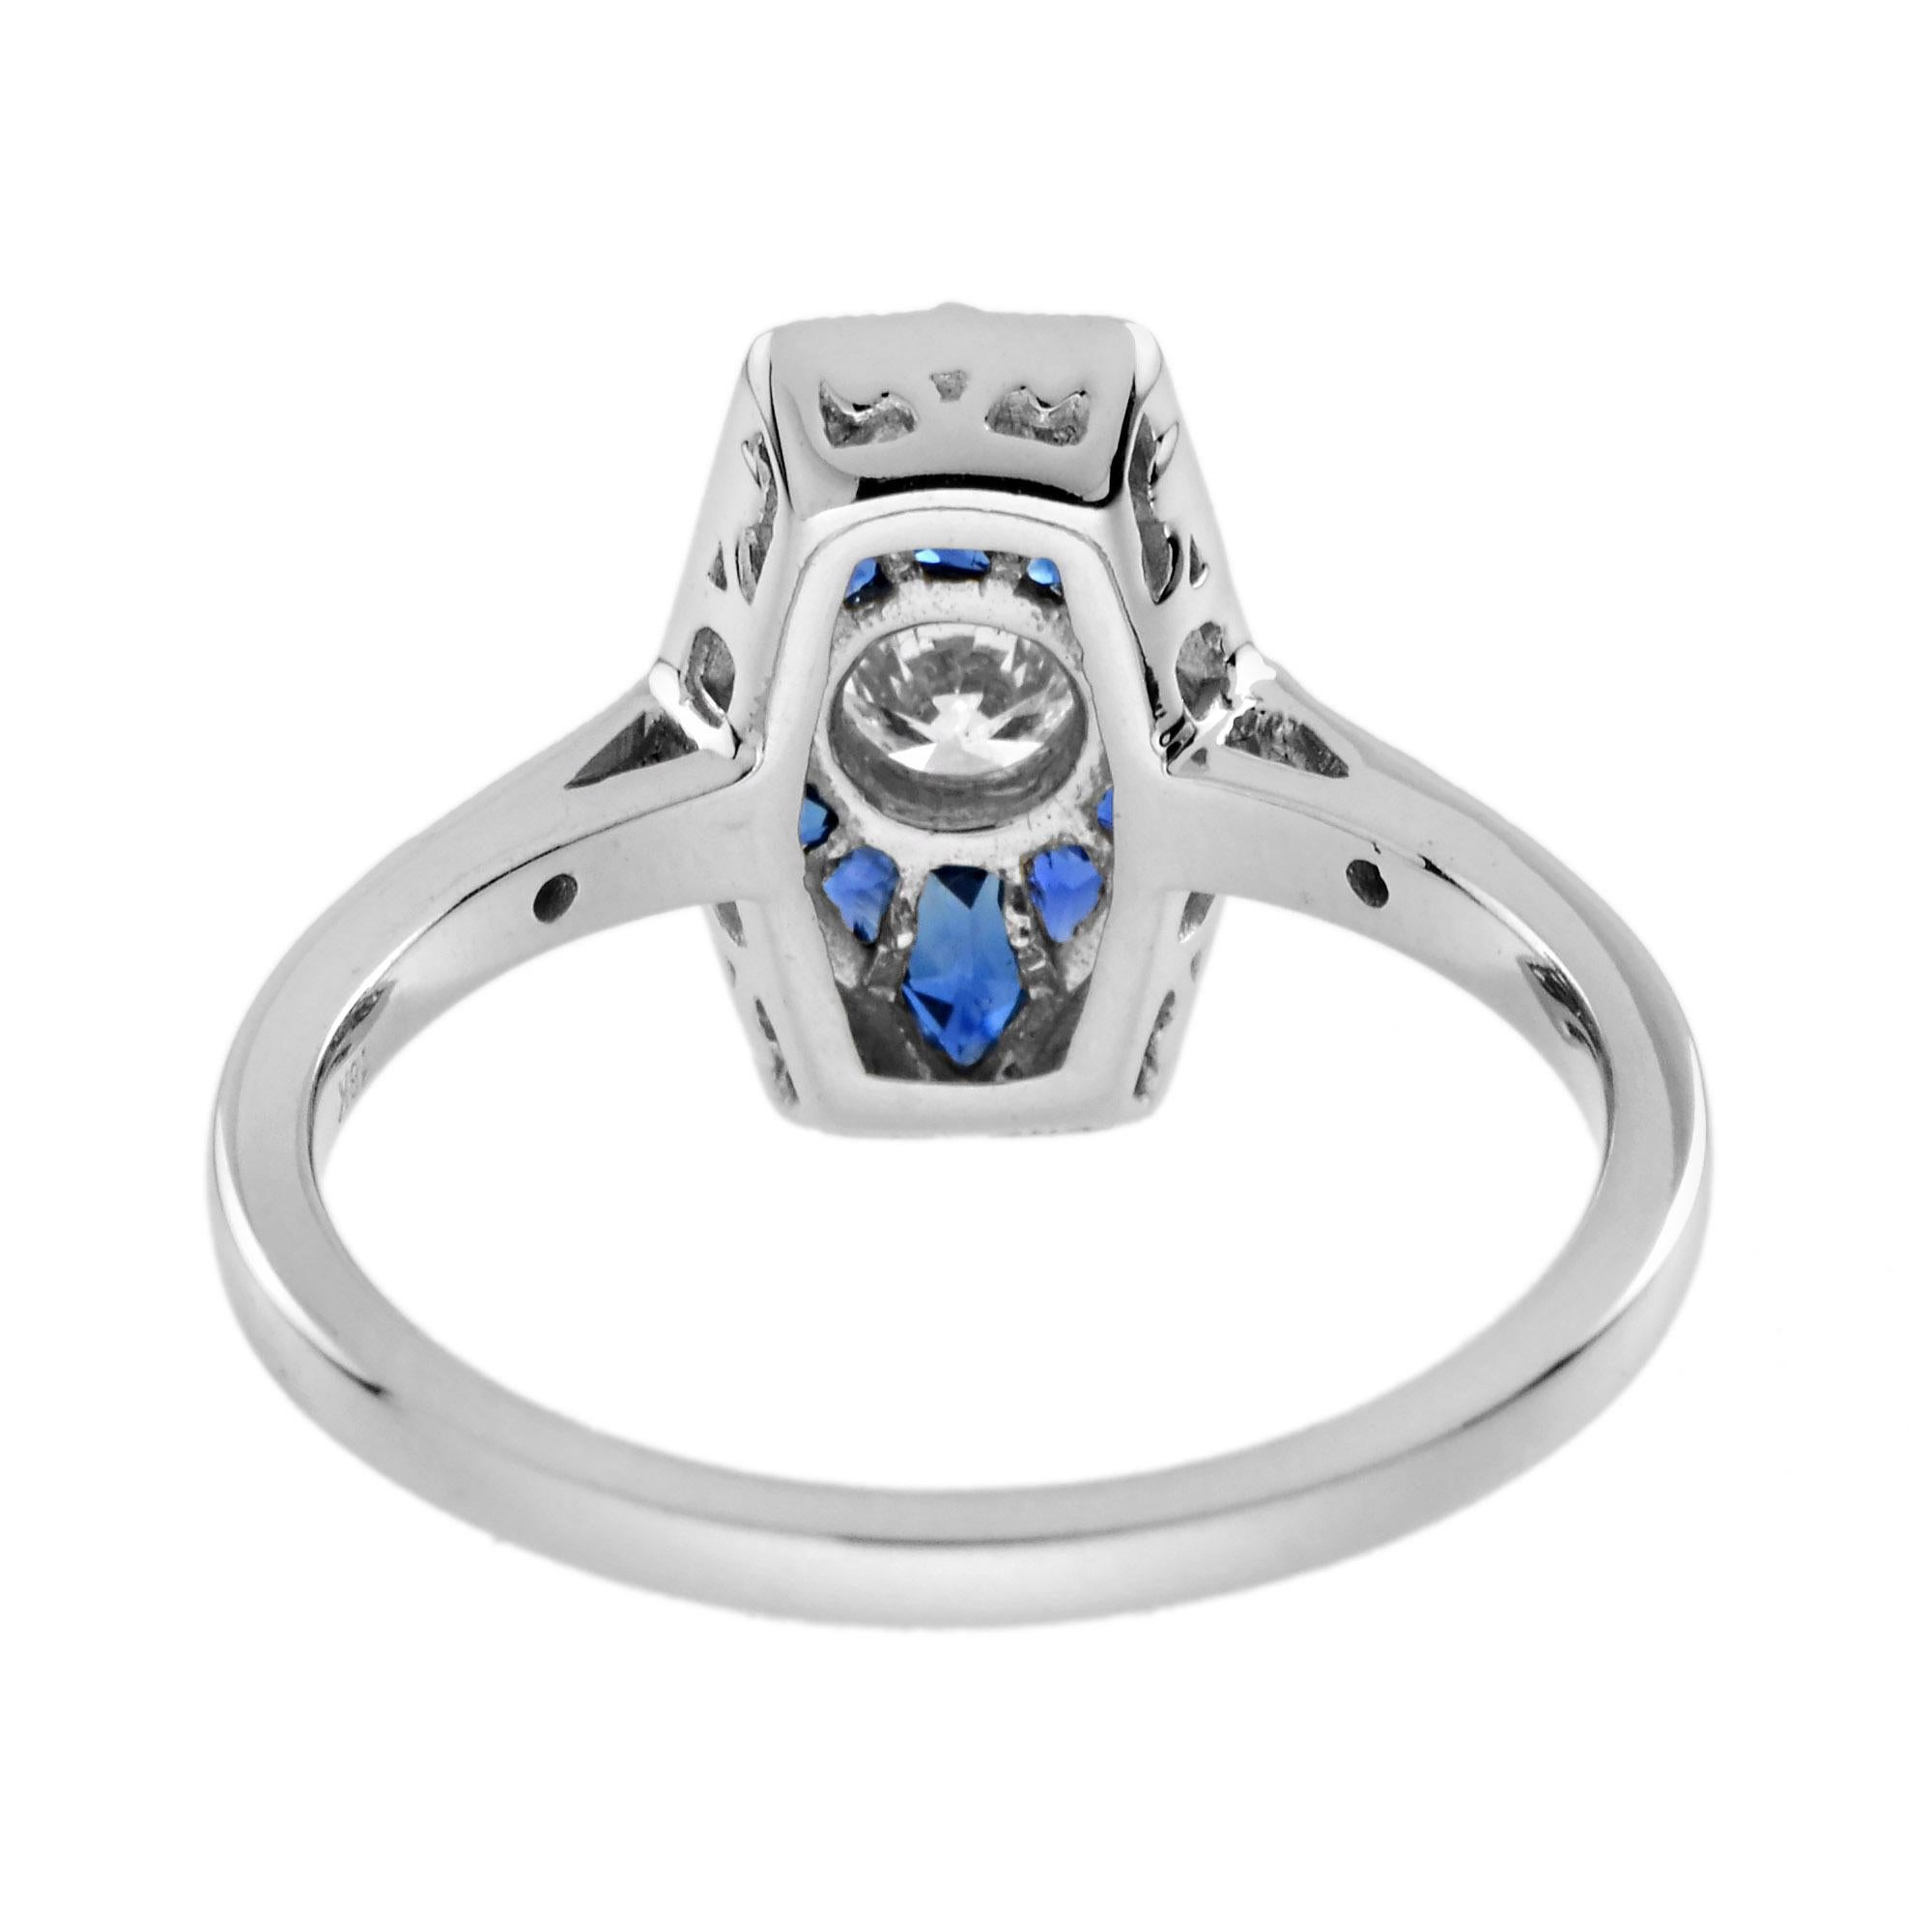 For Sale:  Diamond and Sapphire Art Deco Style Rhombus Engagement Ring in 18K White Gold  5